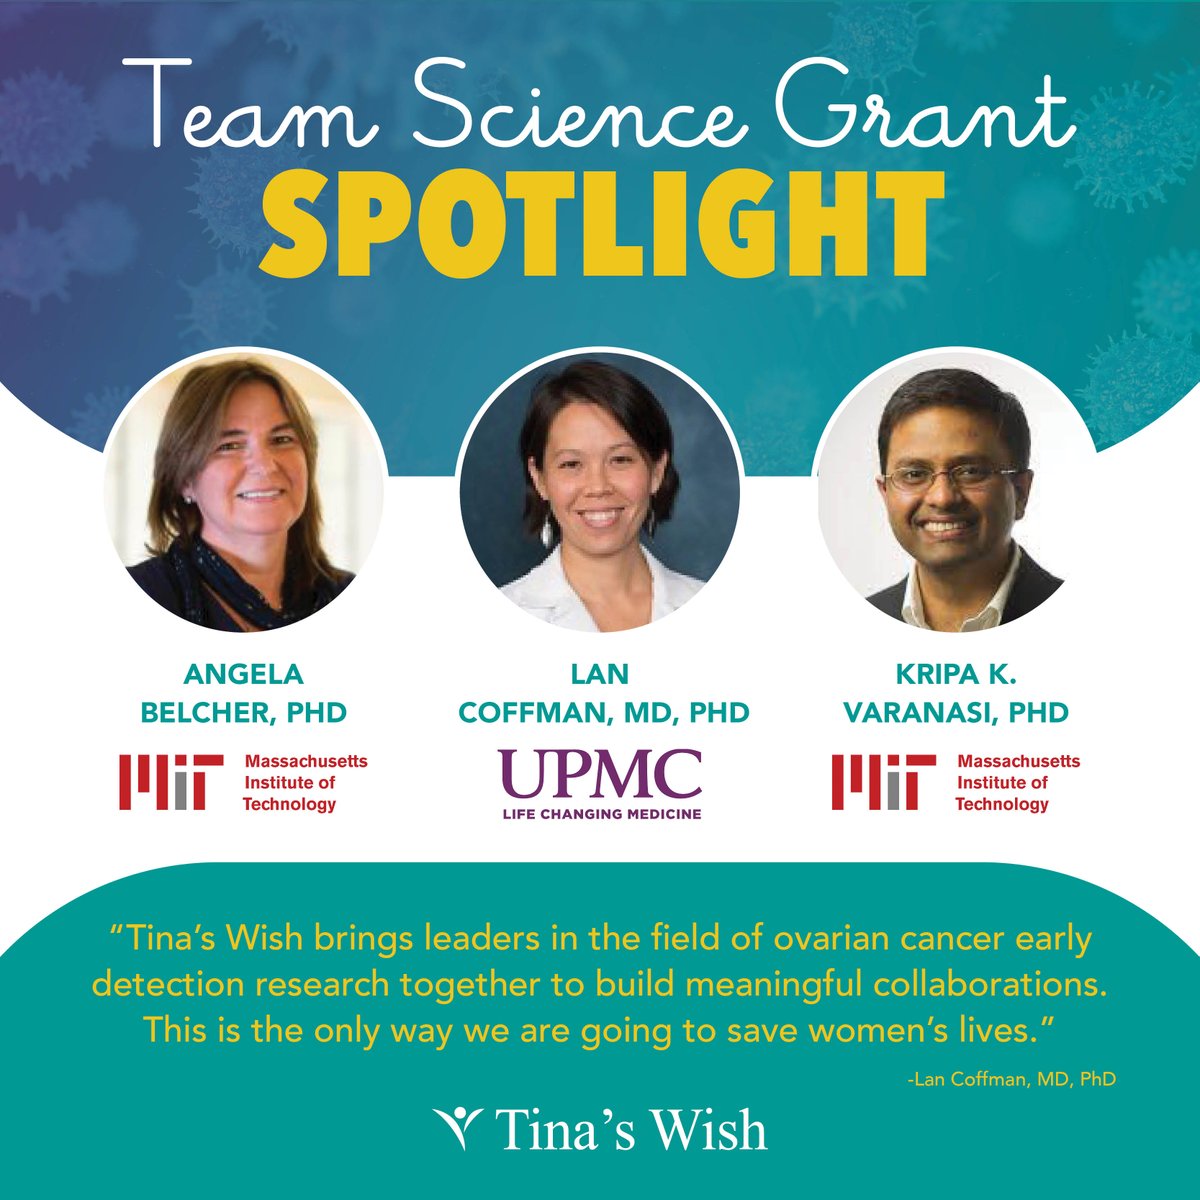 Tina’s Wish grantees Drs. Angela Belcher and Kripa Varanasi @MIT, and Dr. Lan Coffman @UPMC demonstrate the power of collaboration in advancing research for the early detection of ovarian cancer. To learn visit: tinaswish.org/portfolio/belc…